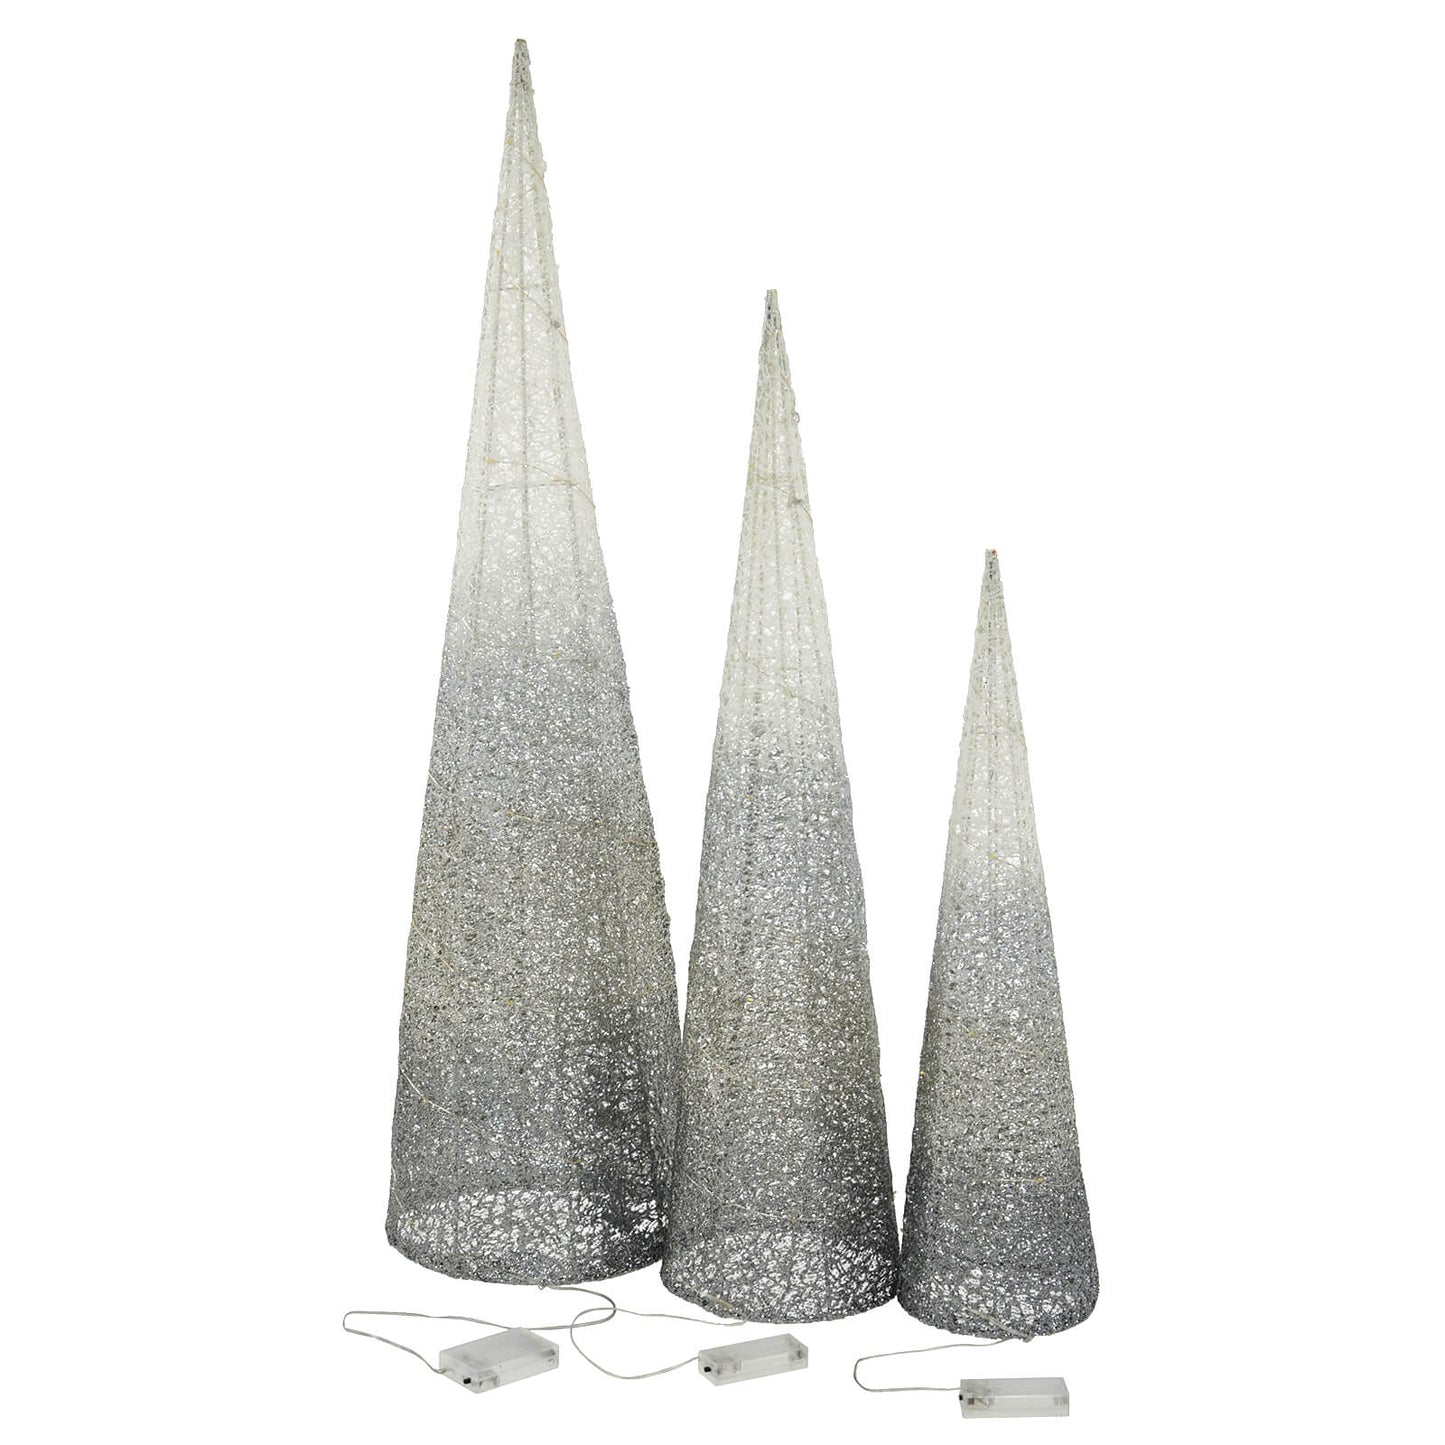 Set of 3 battery operated LED cone shape Christmas tree with white to silver glitter mesh